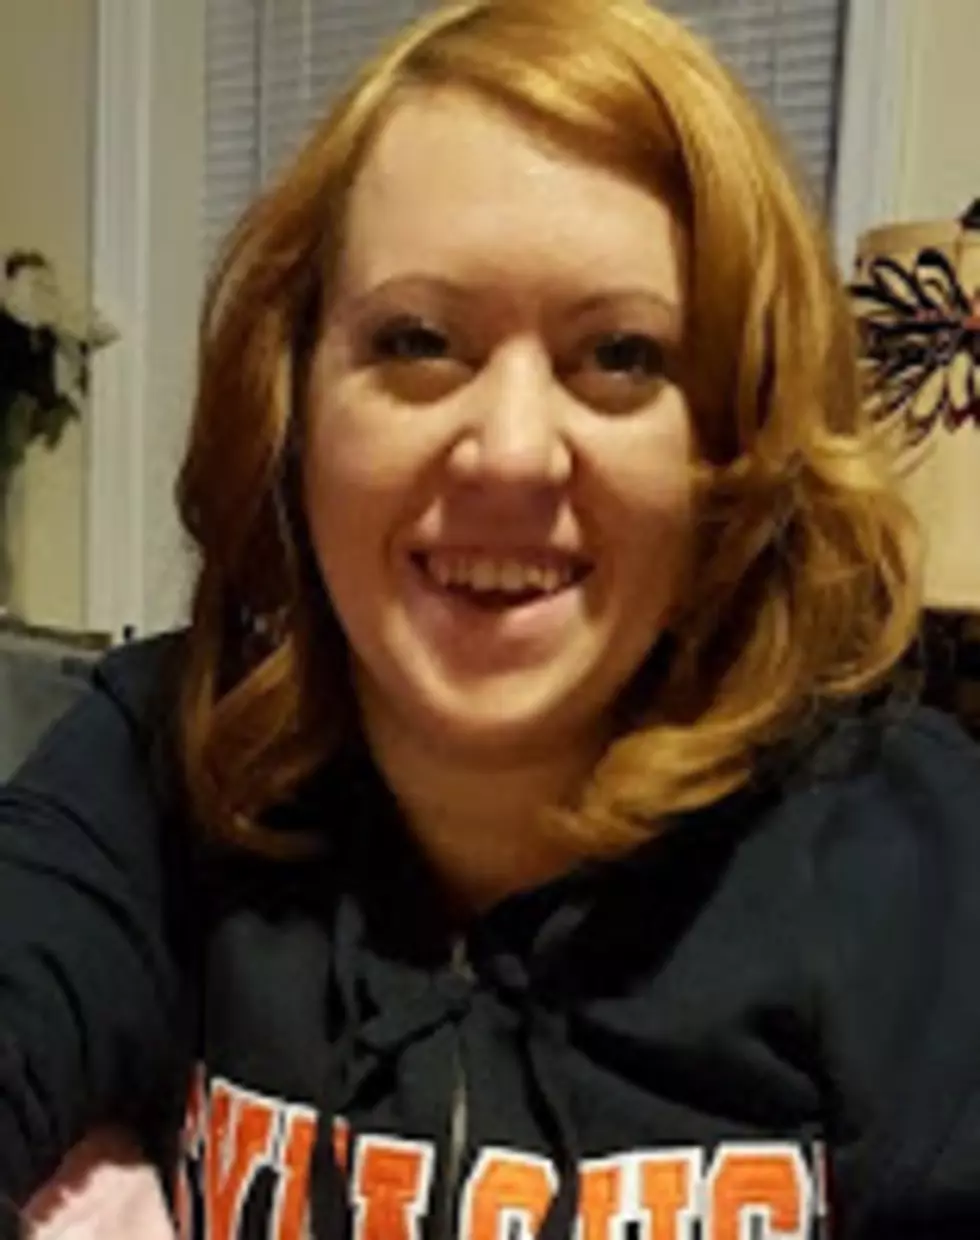 Lockport Woman Missing: Have You Seen Her?